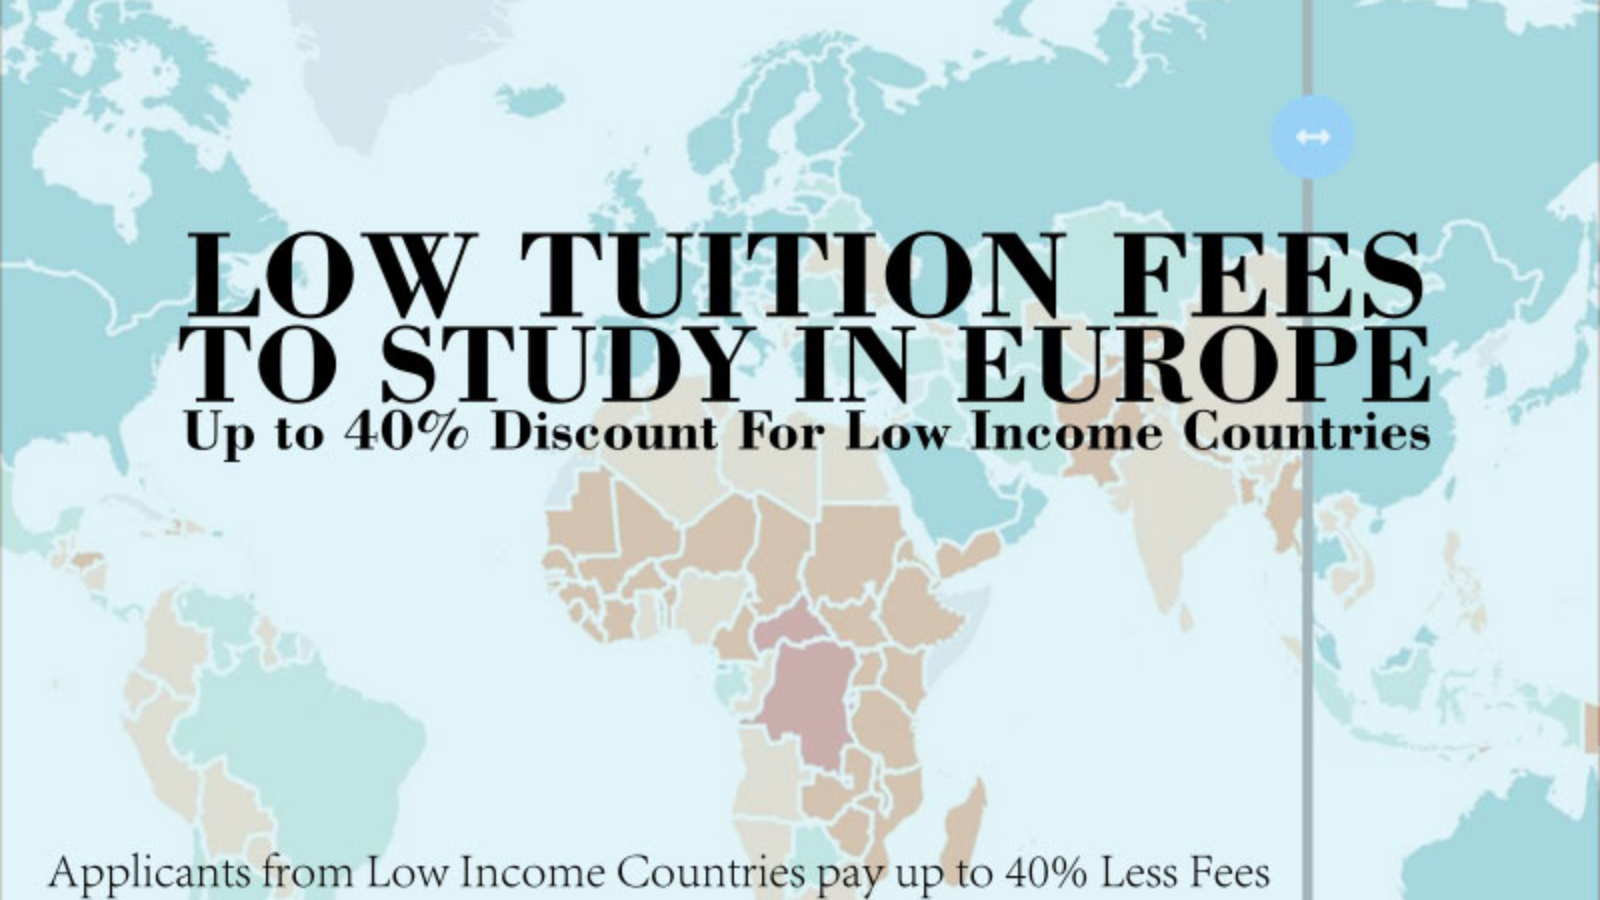 Low Tuition Fees for Study in Europe For Low Income Countries